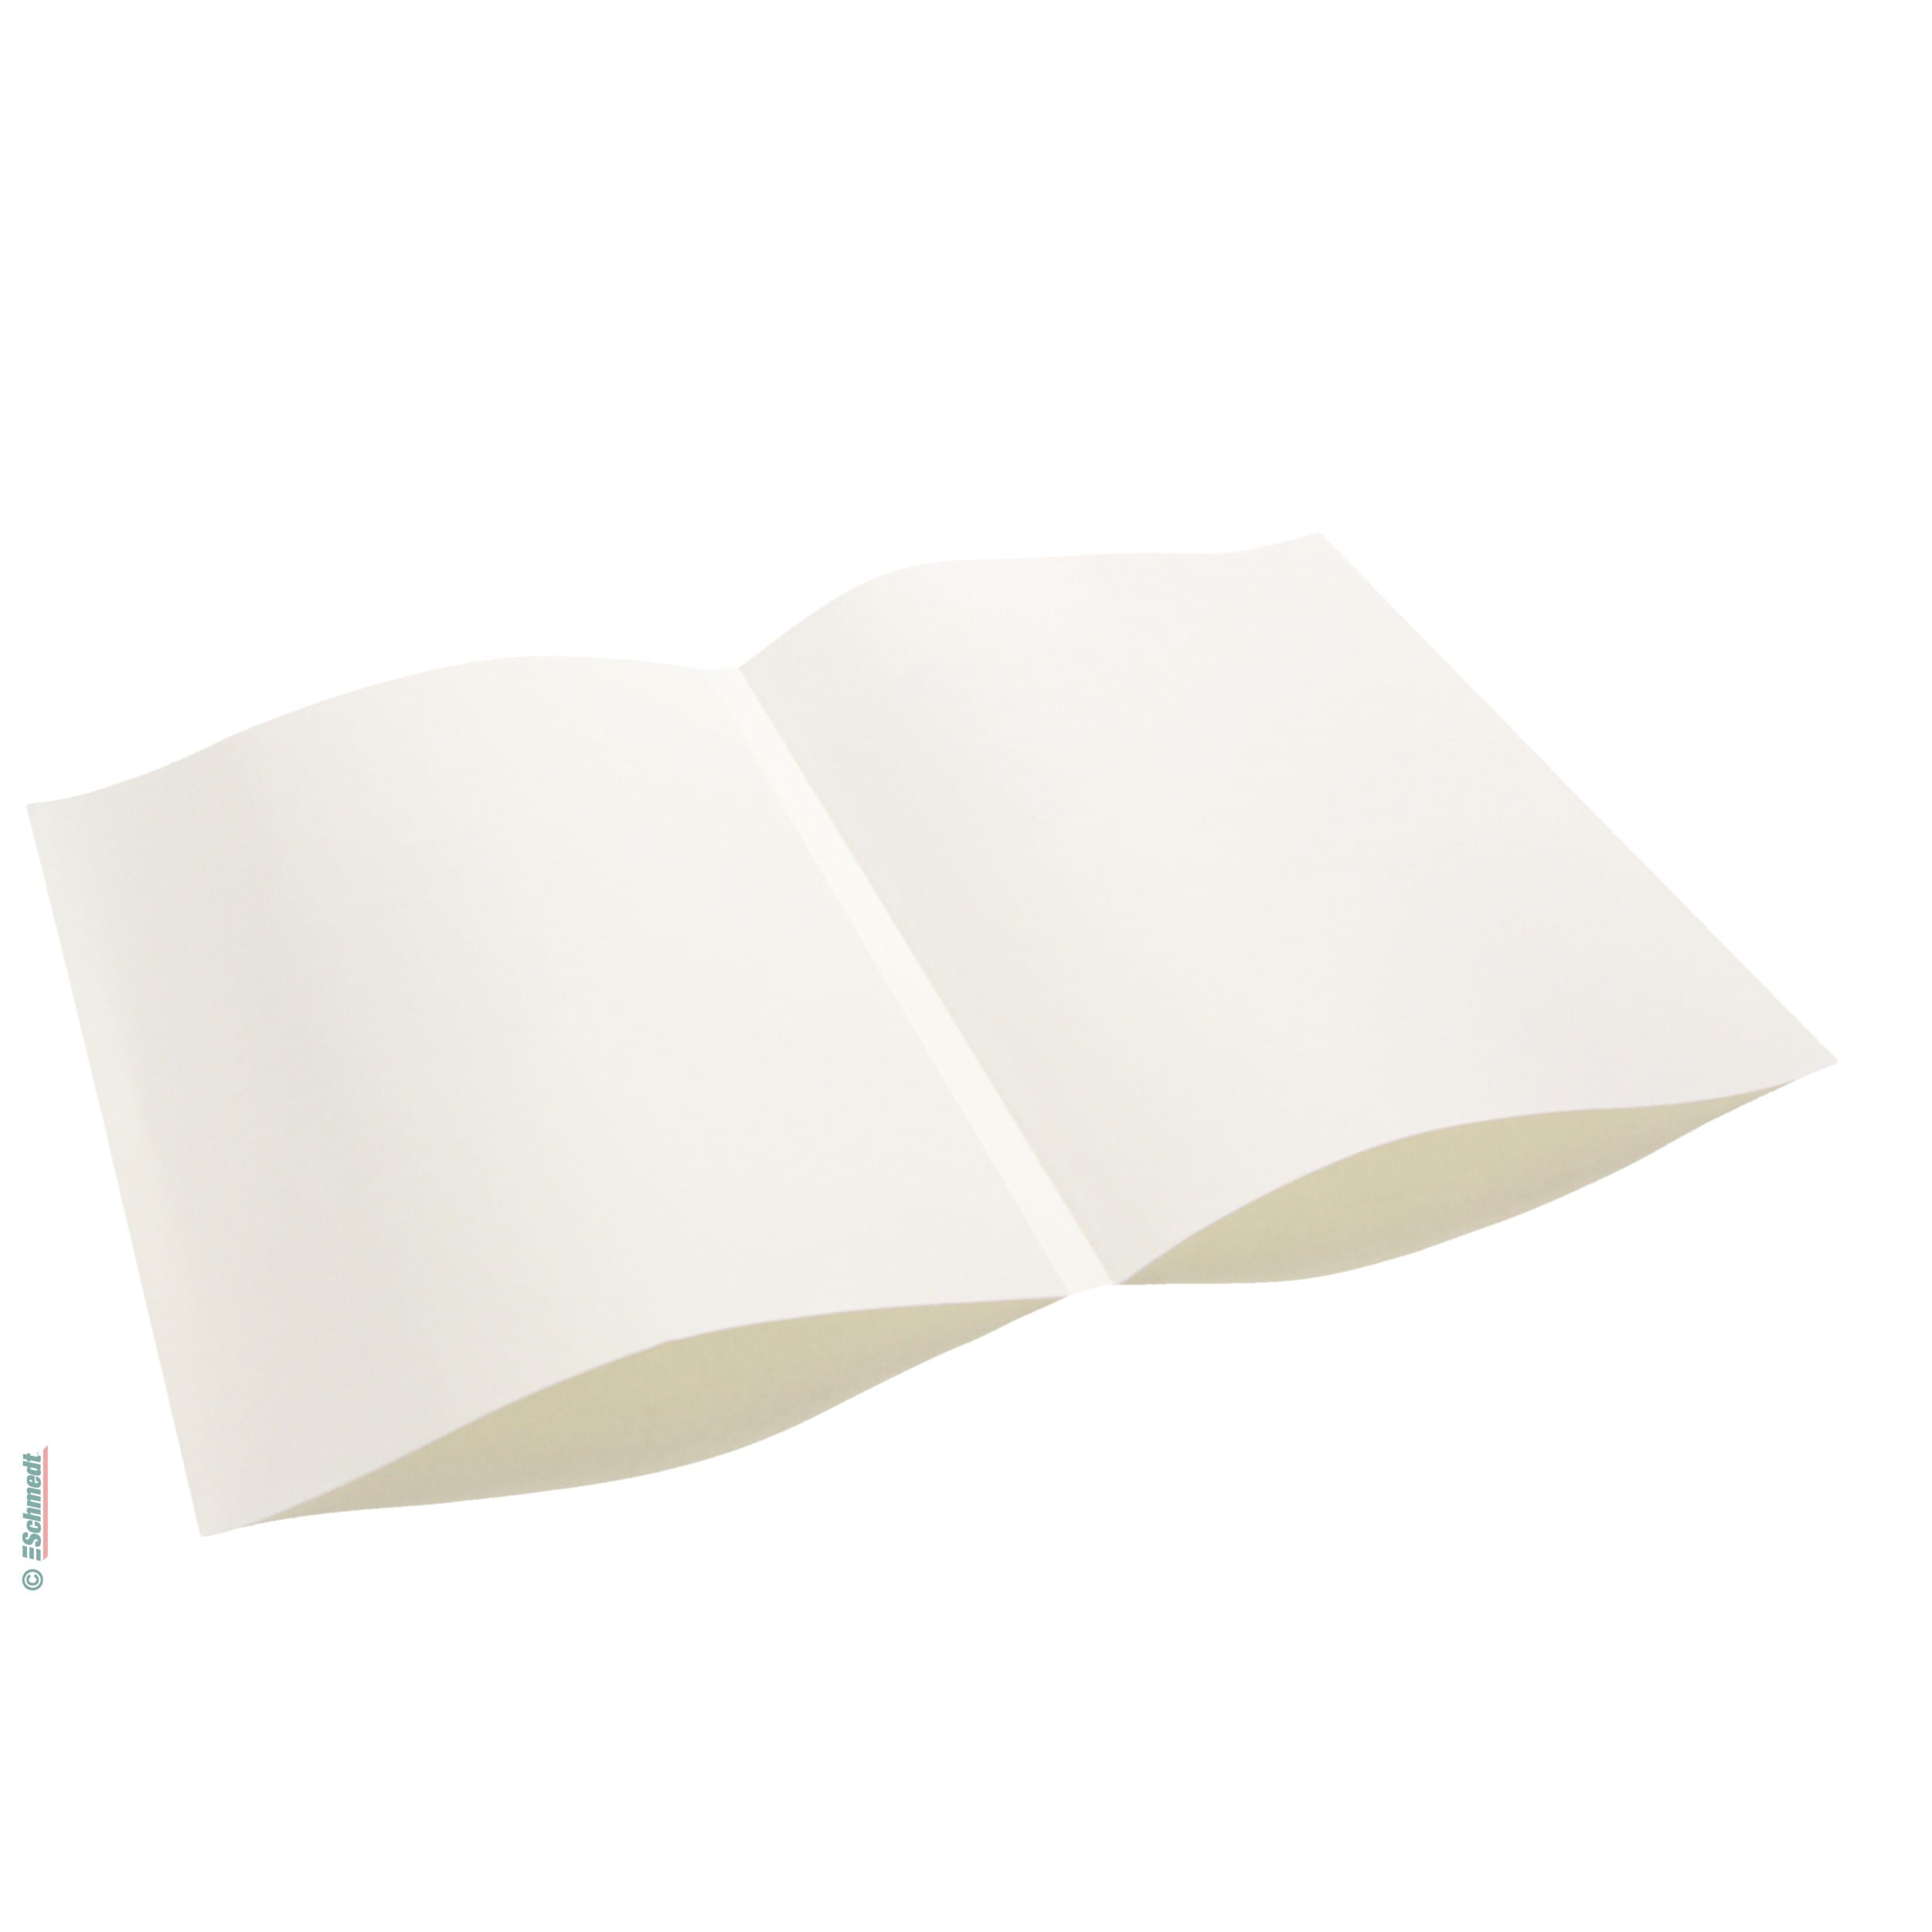 Storage Binder for Photos or Documents with Cream Vegan Leather Cover - Rag  & Bone Bindery